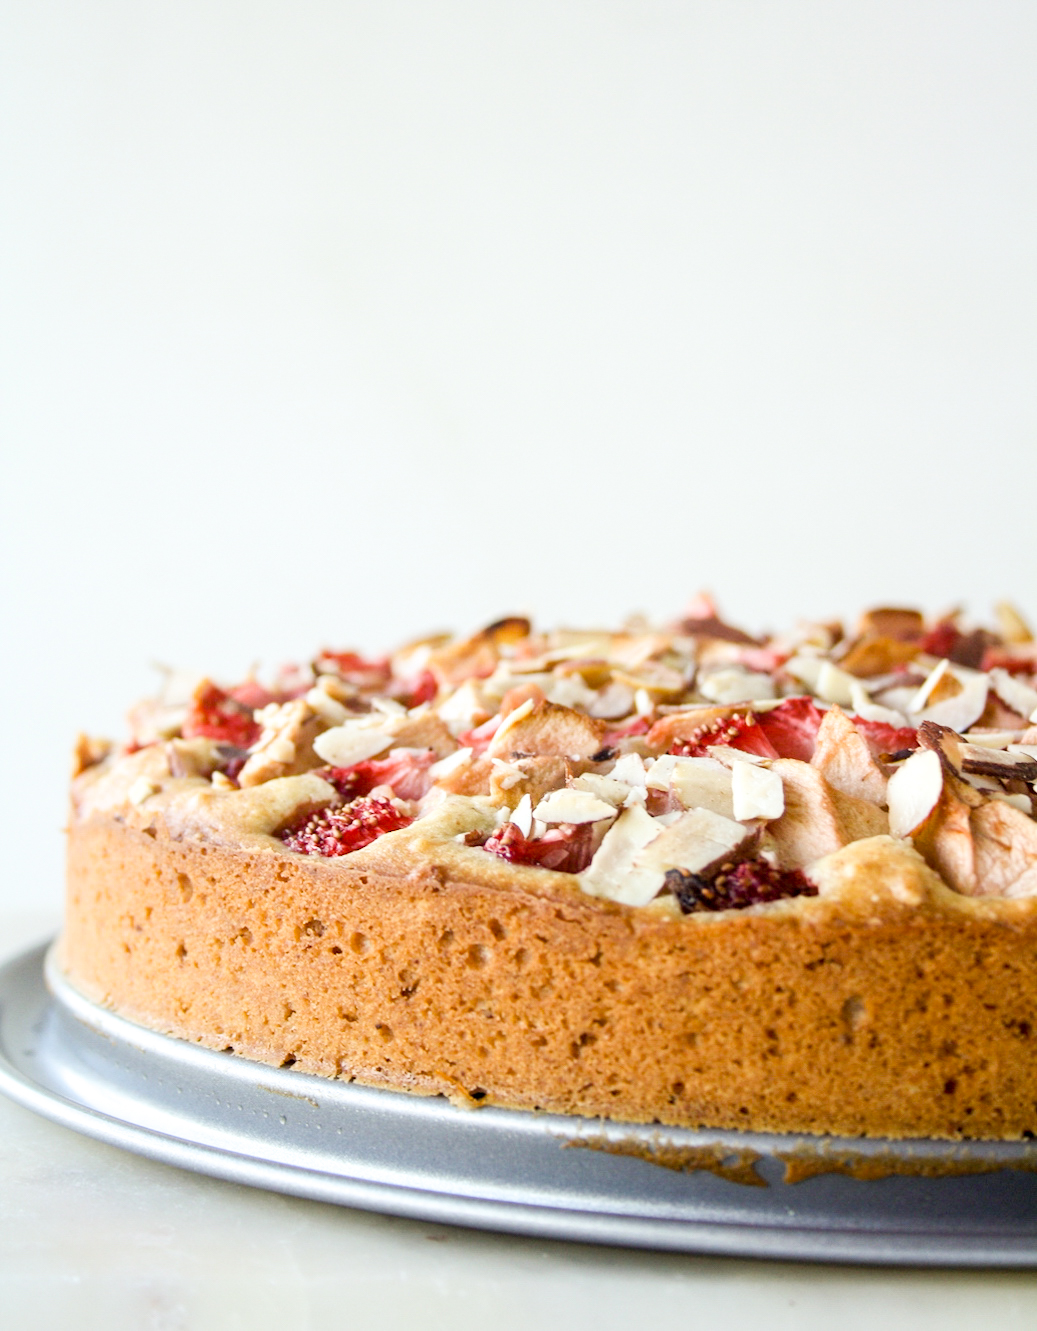 Tender almond and browned butter cake topped with fresh apples and strawberries